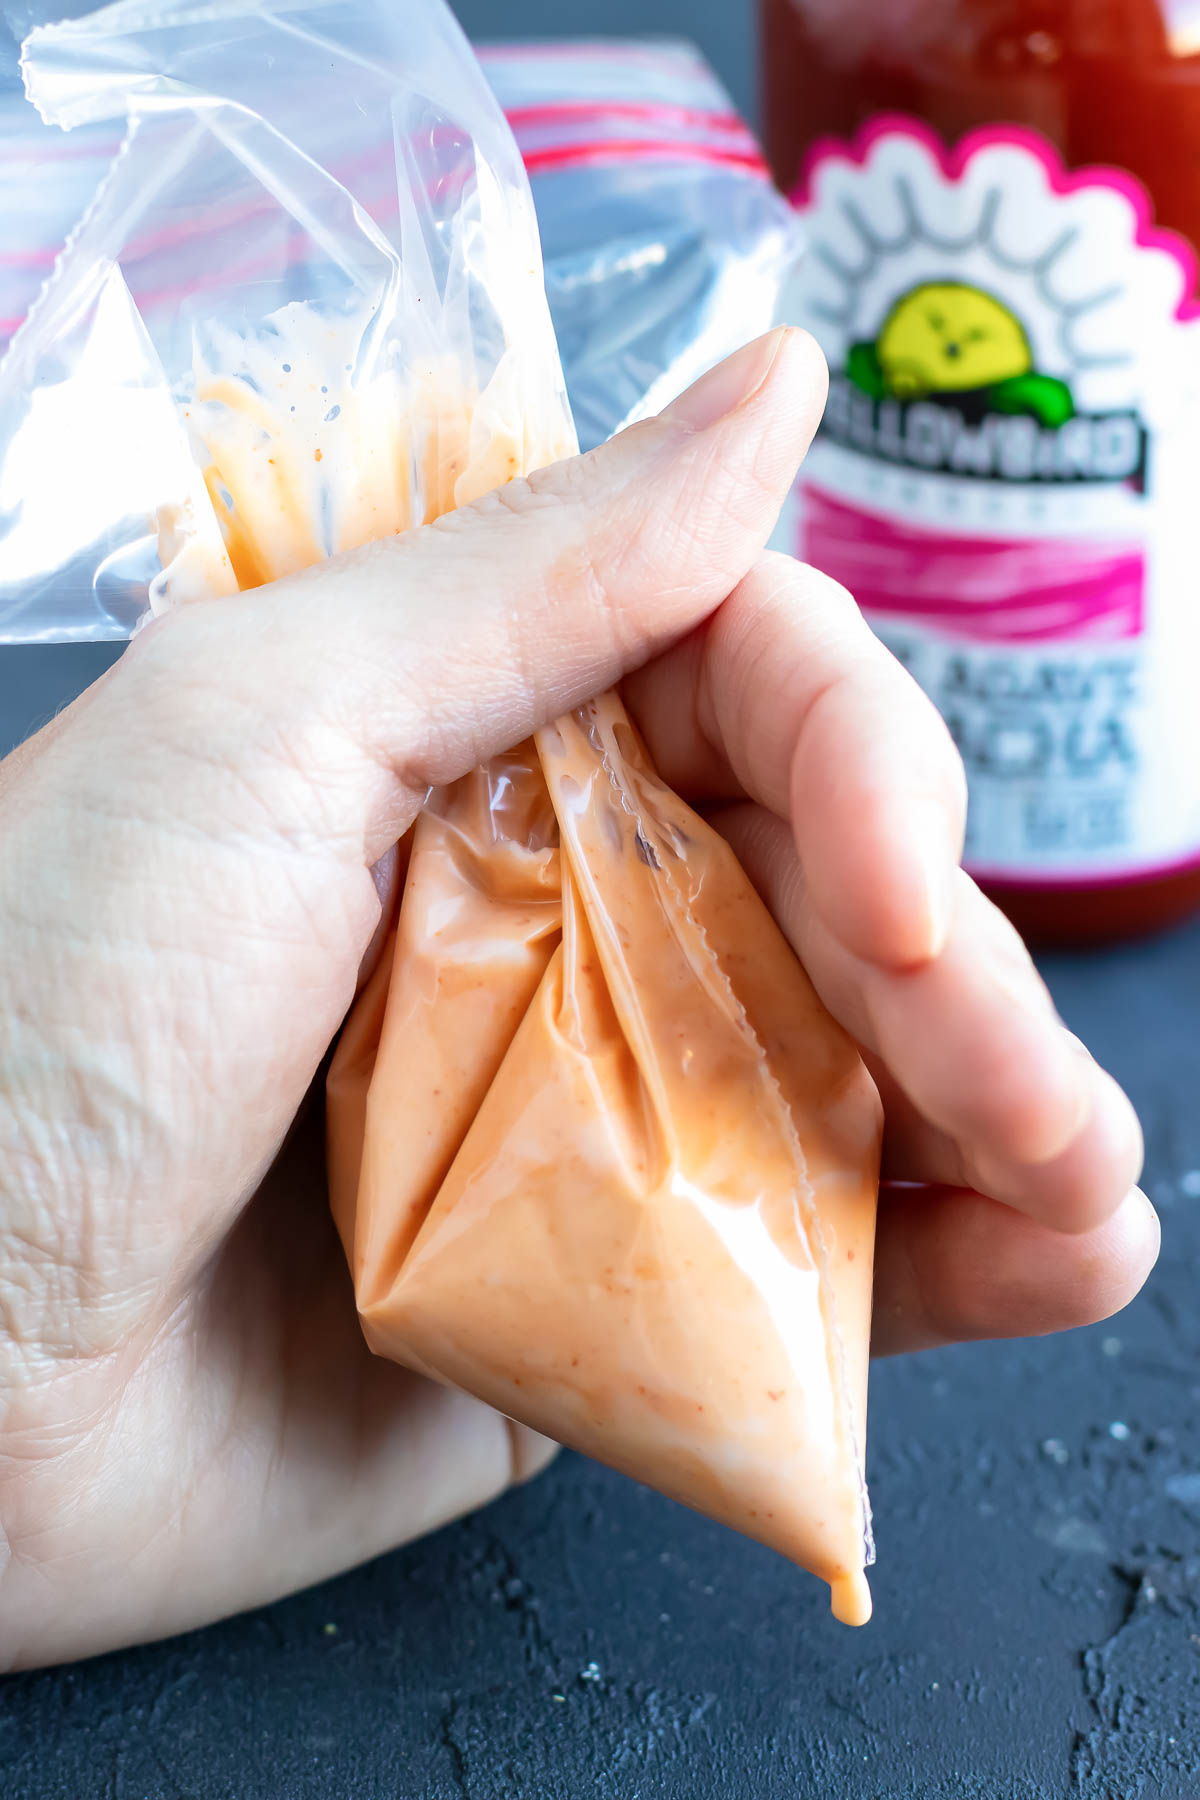 Drizzle the mayo in a bag for ease.